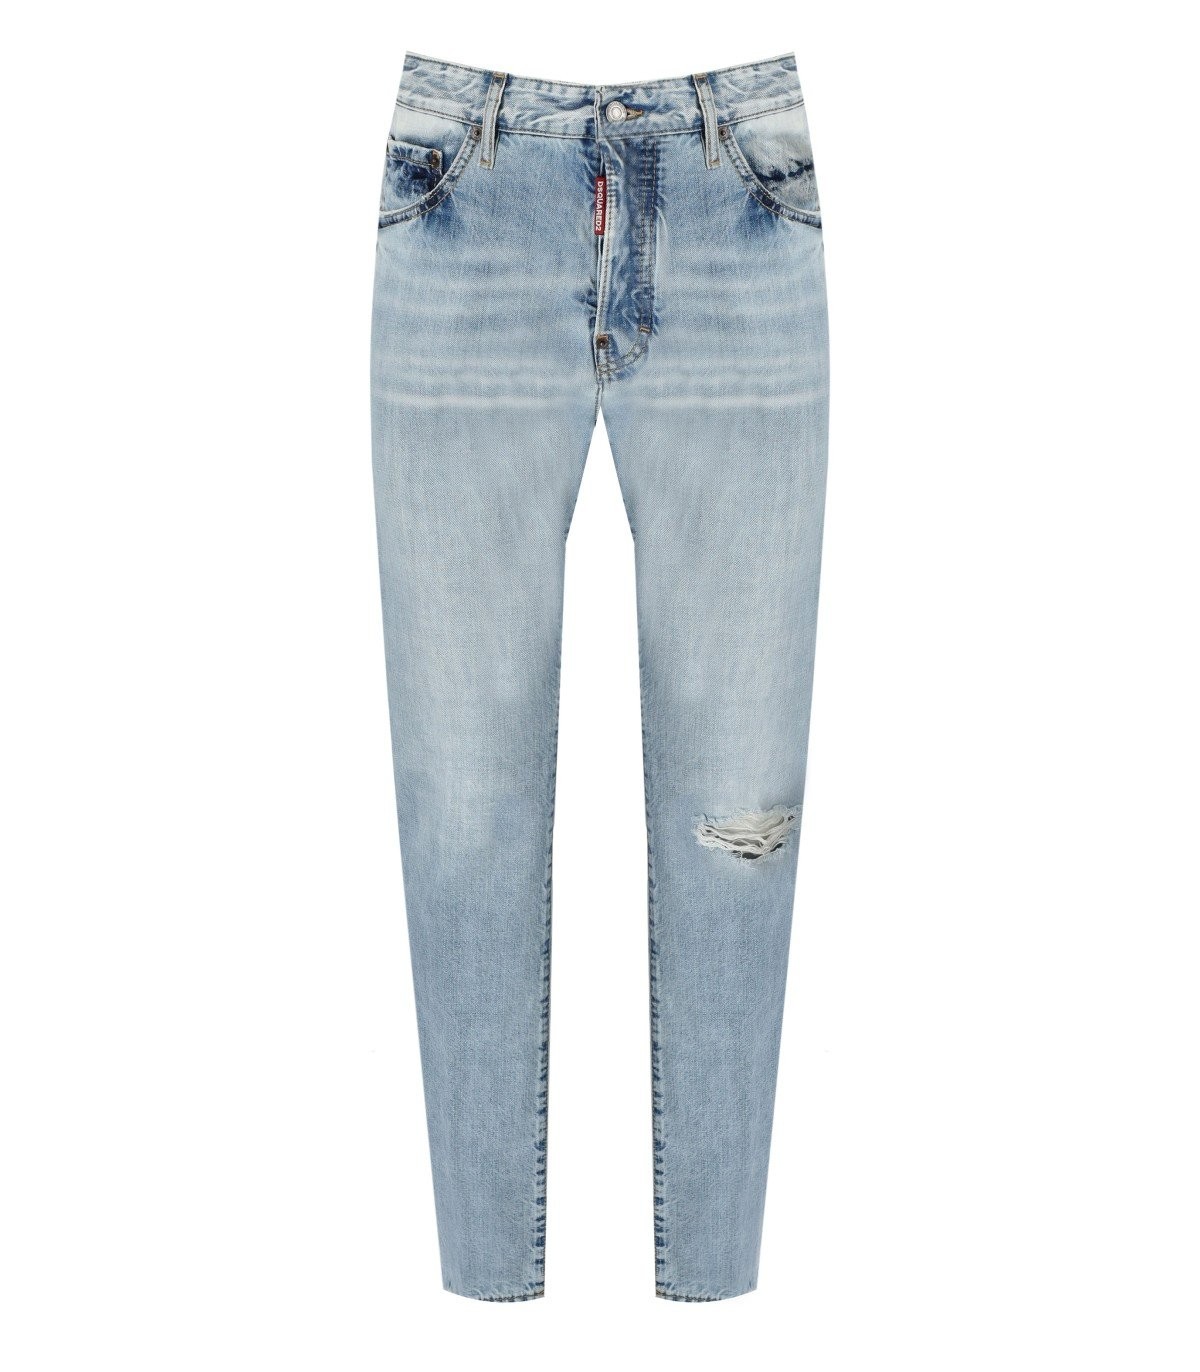 Image of JEANS WASH 642 PALM BEACH AZZURRO DSQUARED2